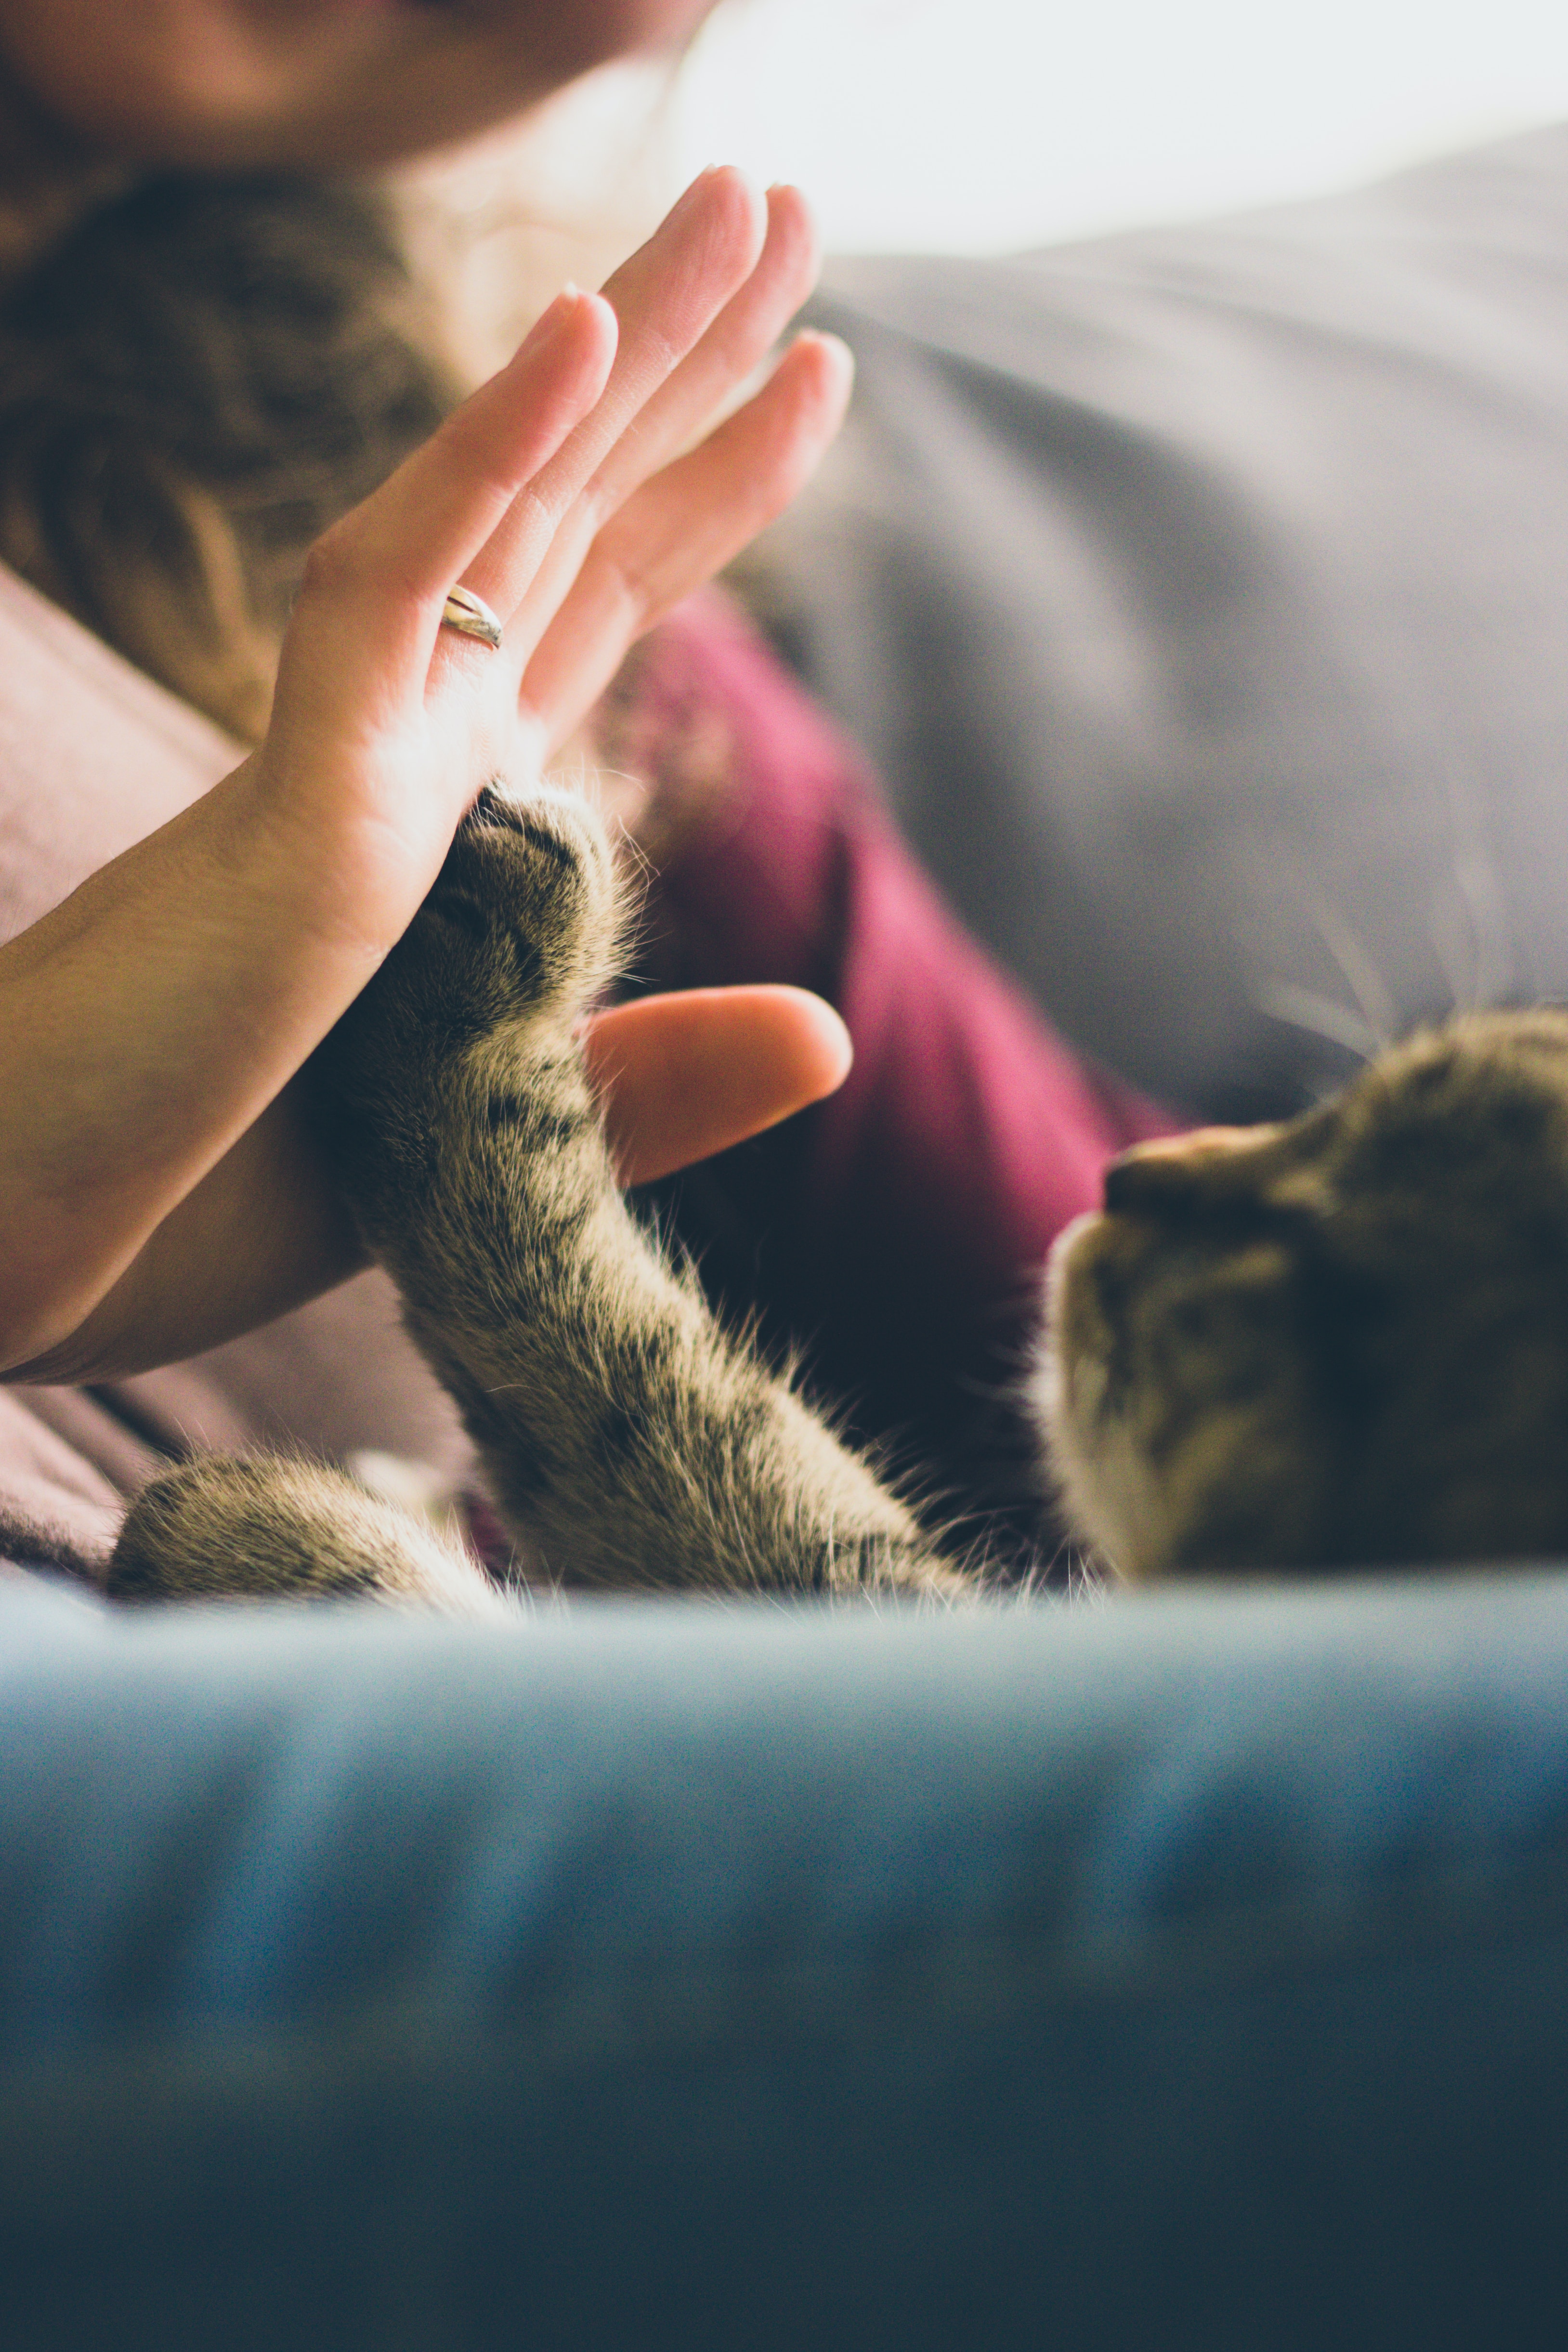 Pet owner high-fiving their cat.